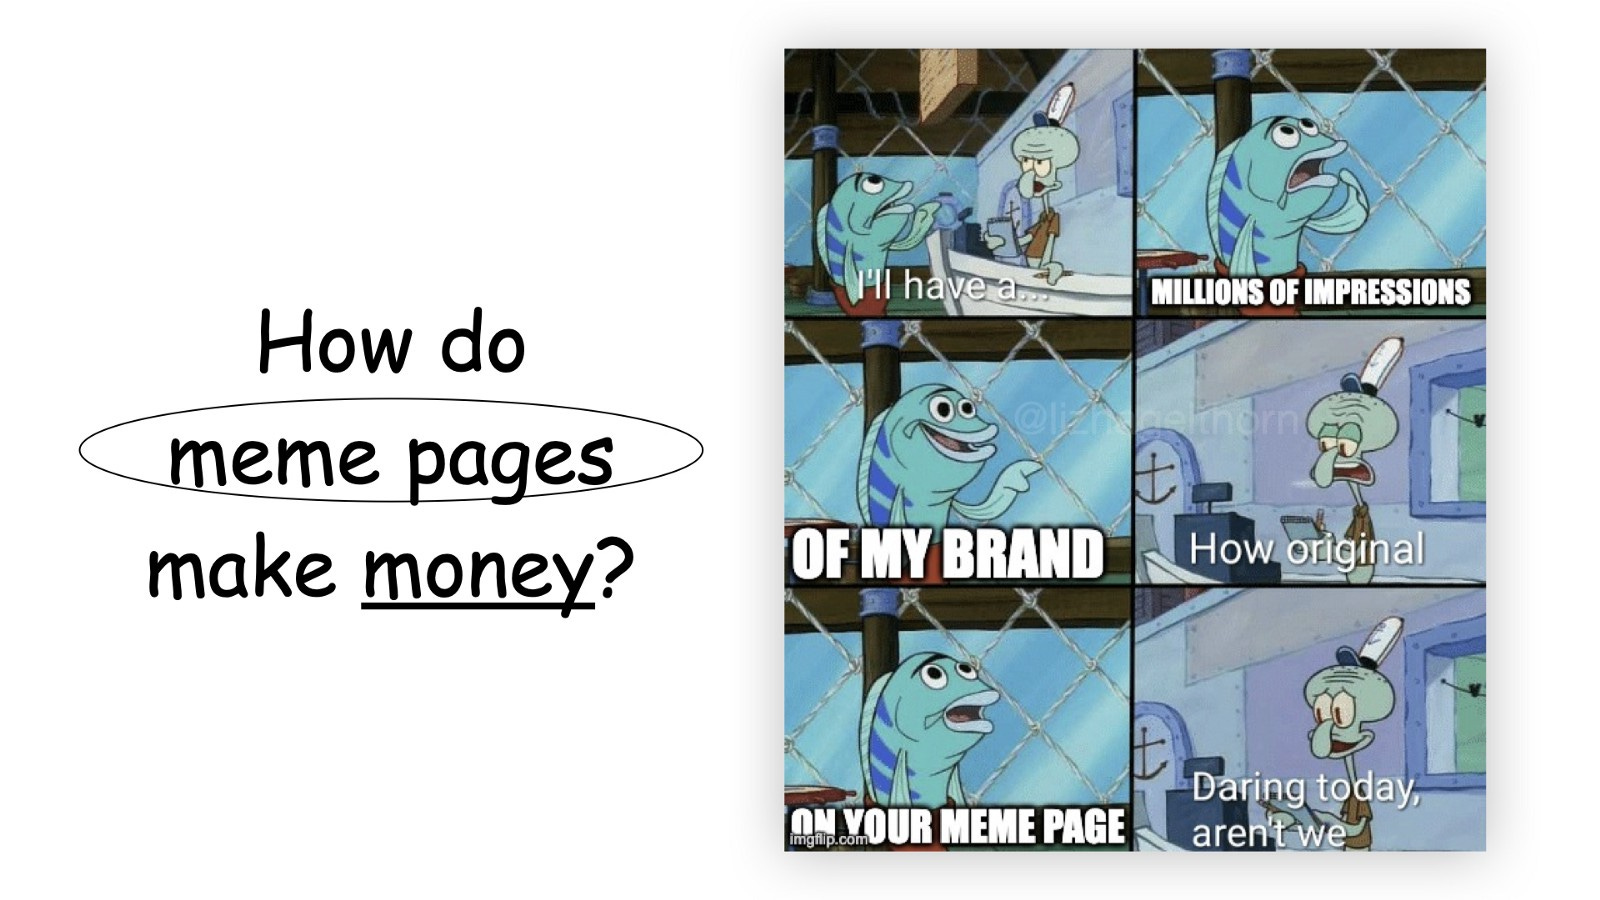 Memes & Monetization: Can You Make Money from Memes?